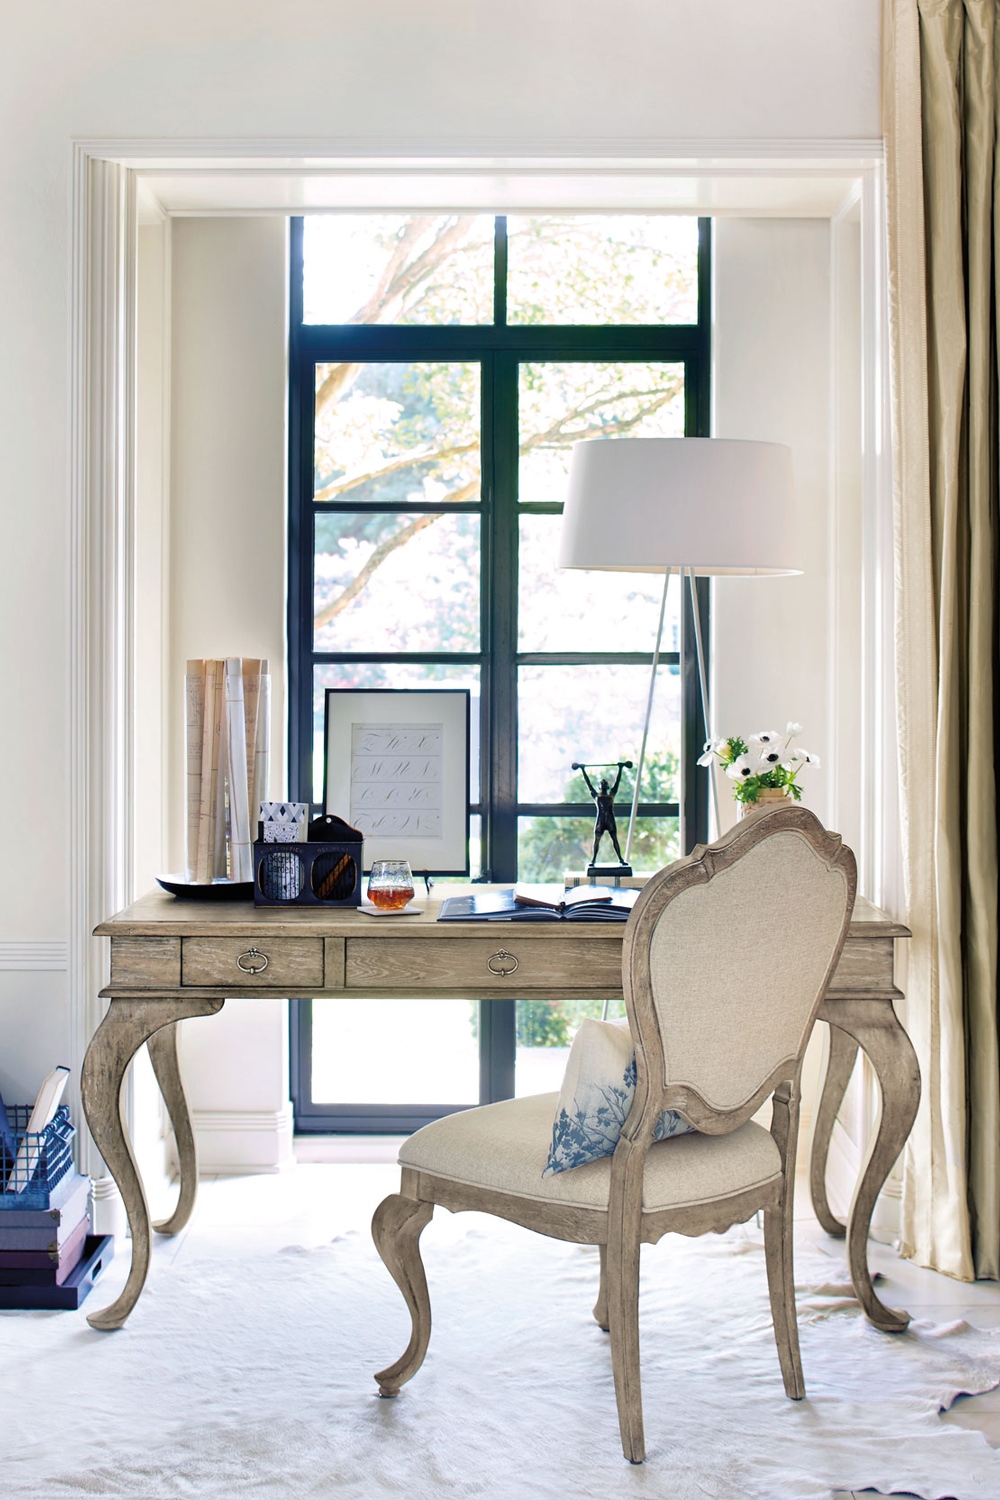 WORKING FROM HOME HOW TO DESIGN THE PERFECT HOME OFFICE